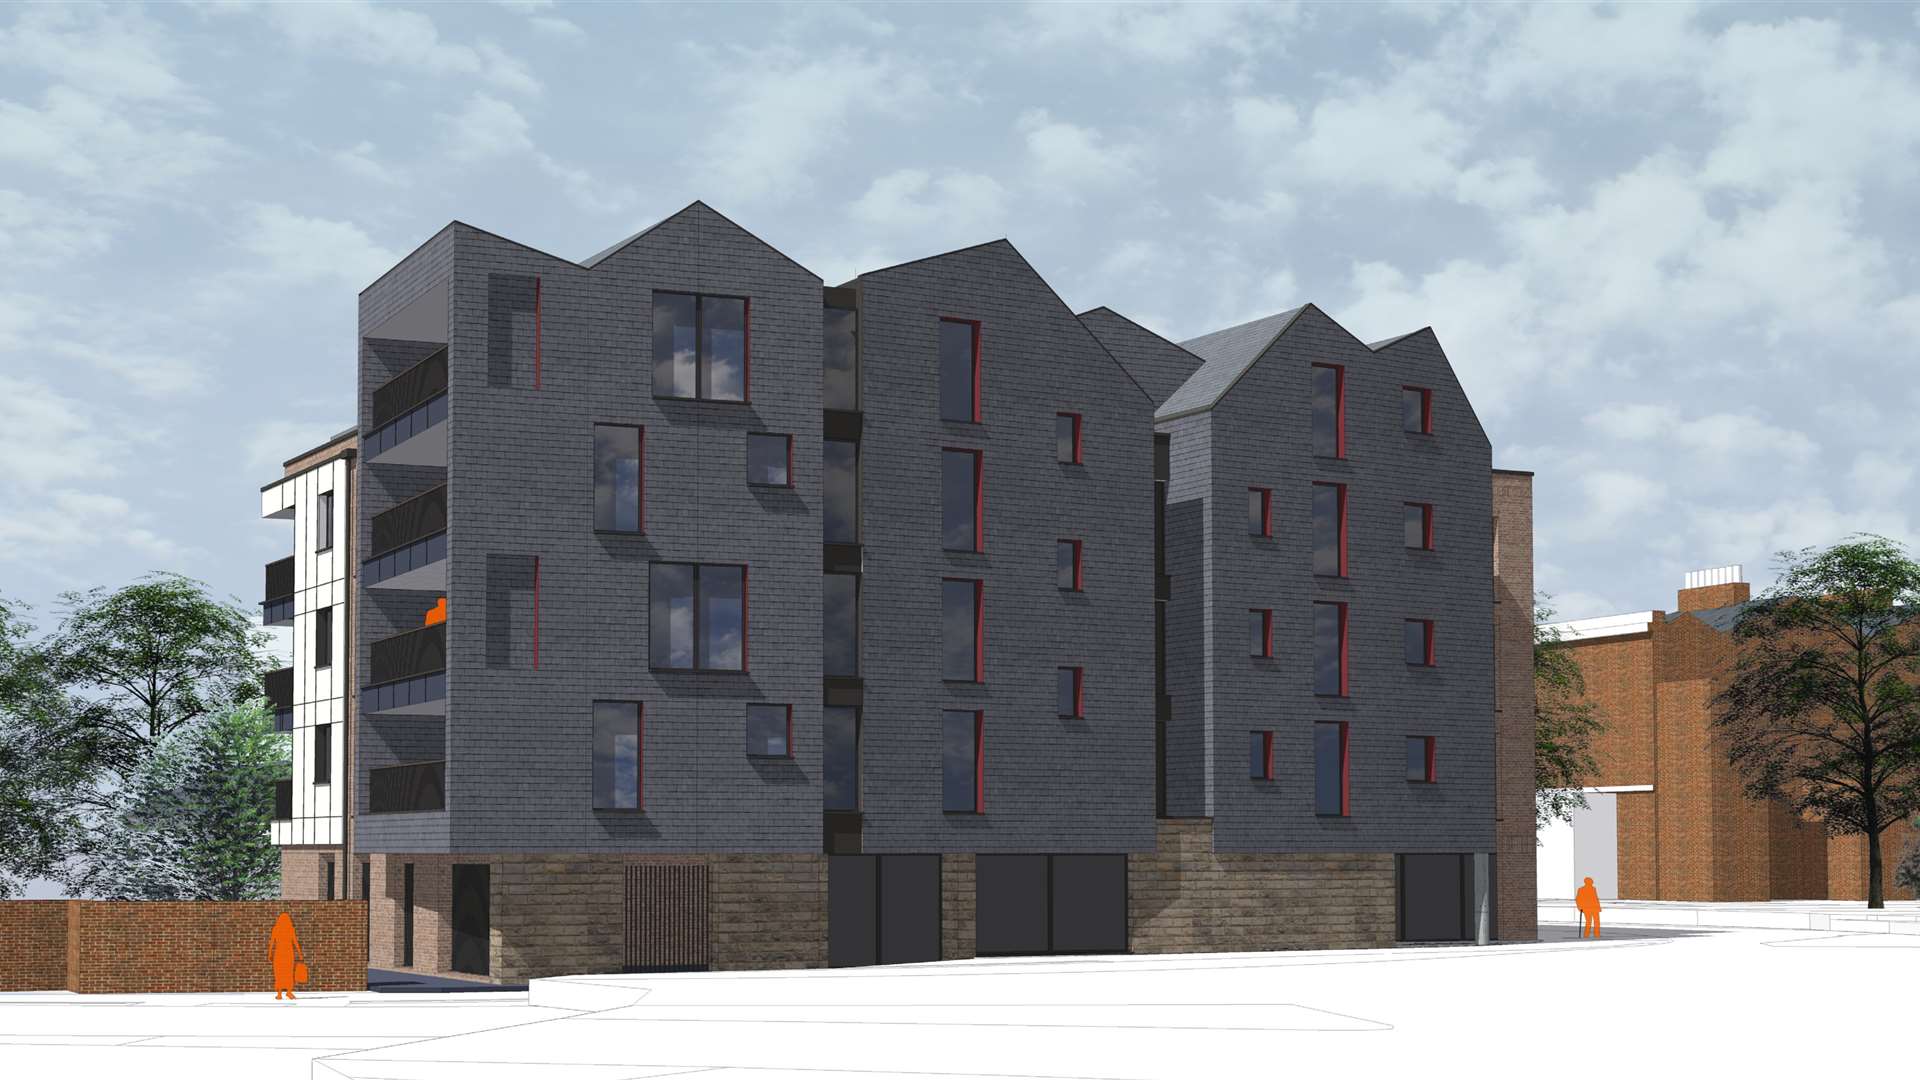 Plans for the new apartment block were approved. Courtesy of Lee Evans Partnership